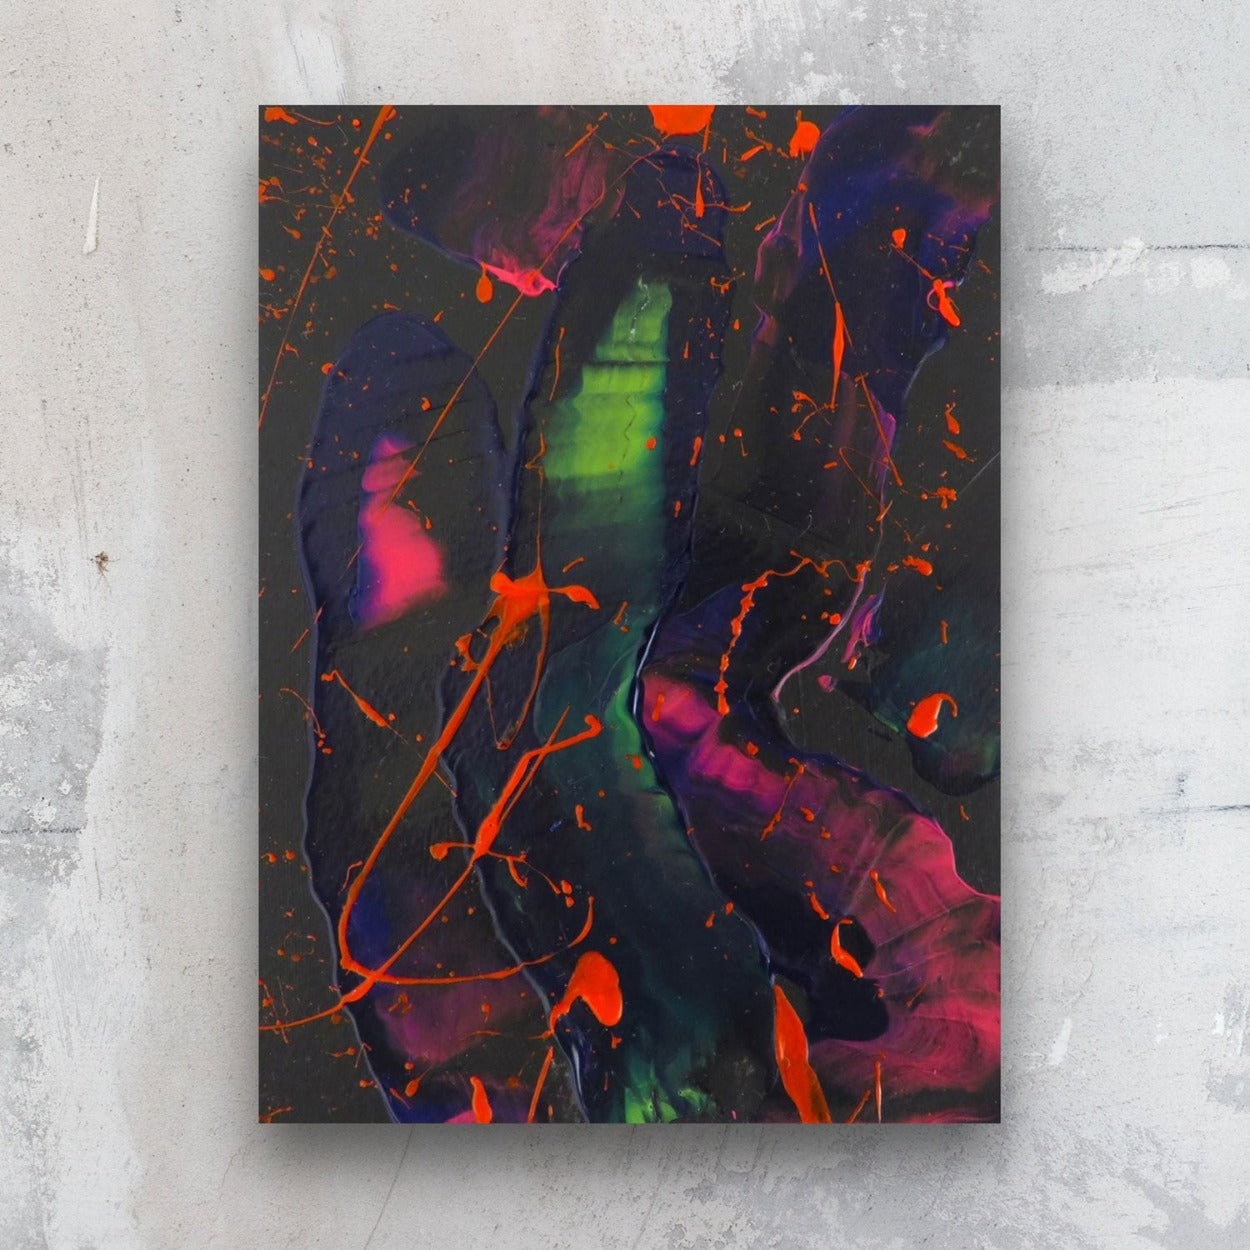 Little Luxuries XIII, original abstract art seen against a stone wall. Dark background with neon marks, painted by Bridget Bradley abstract artist